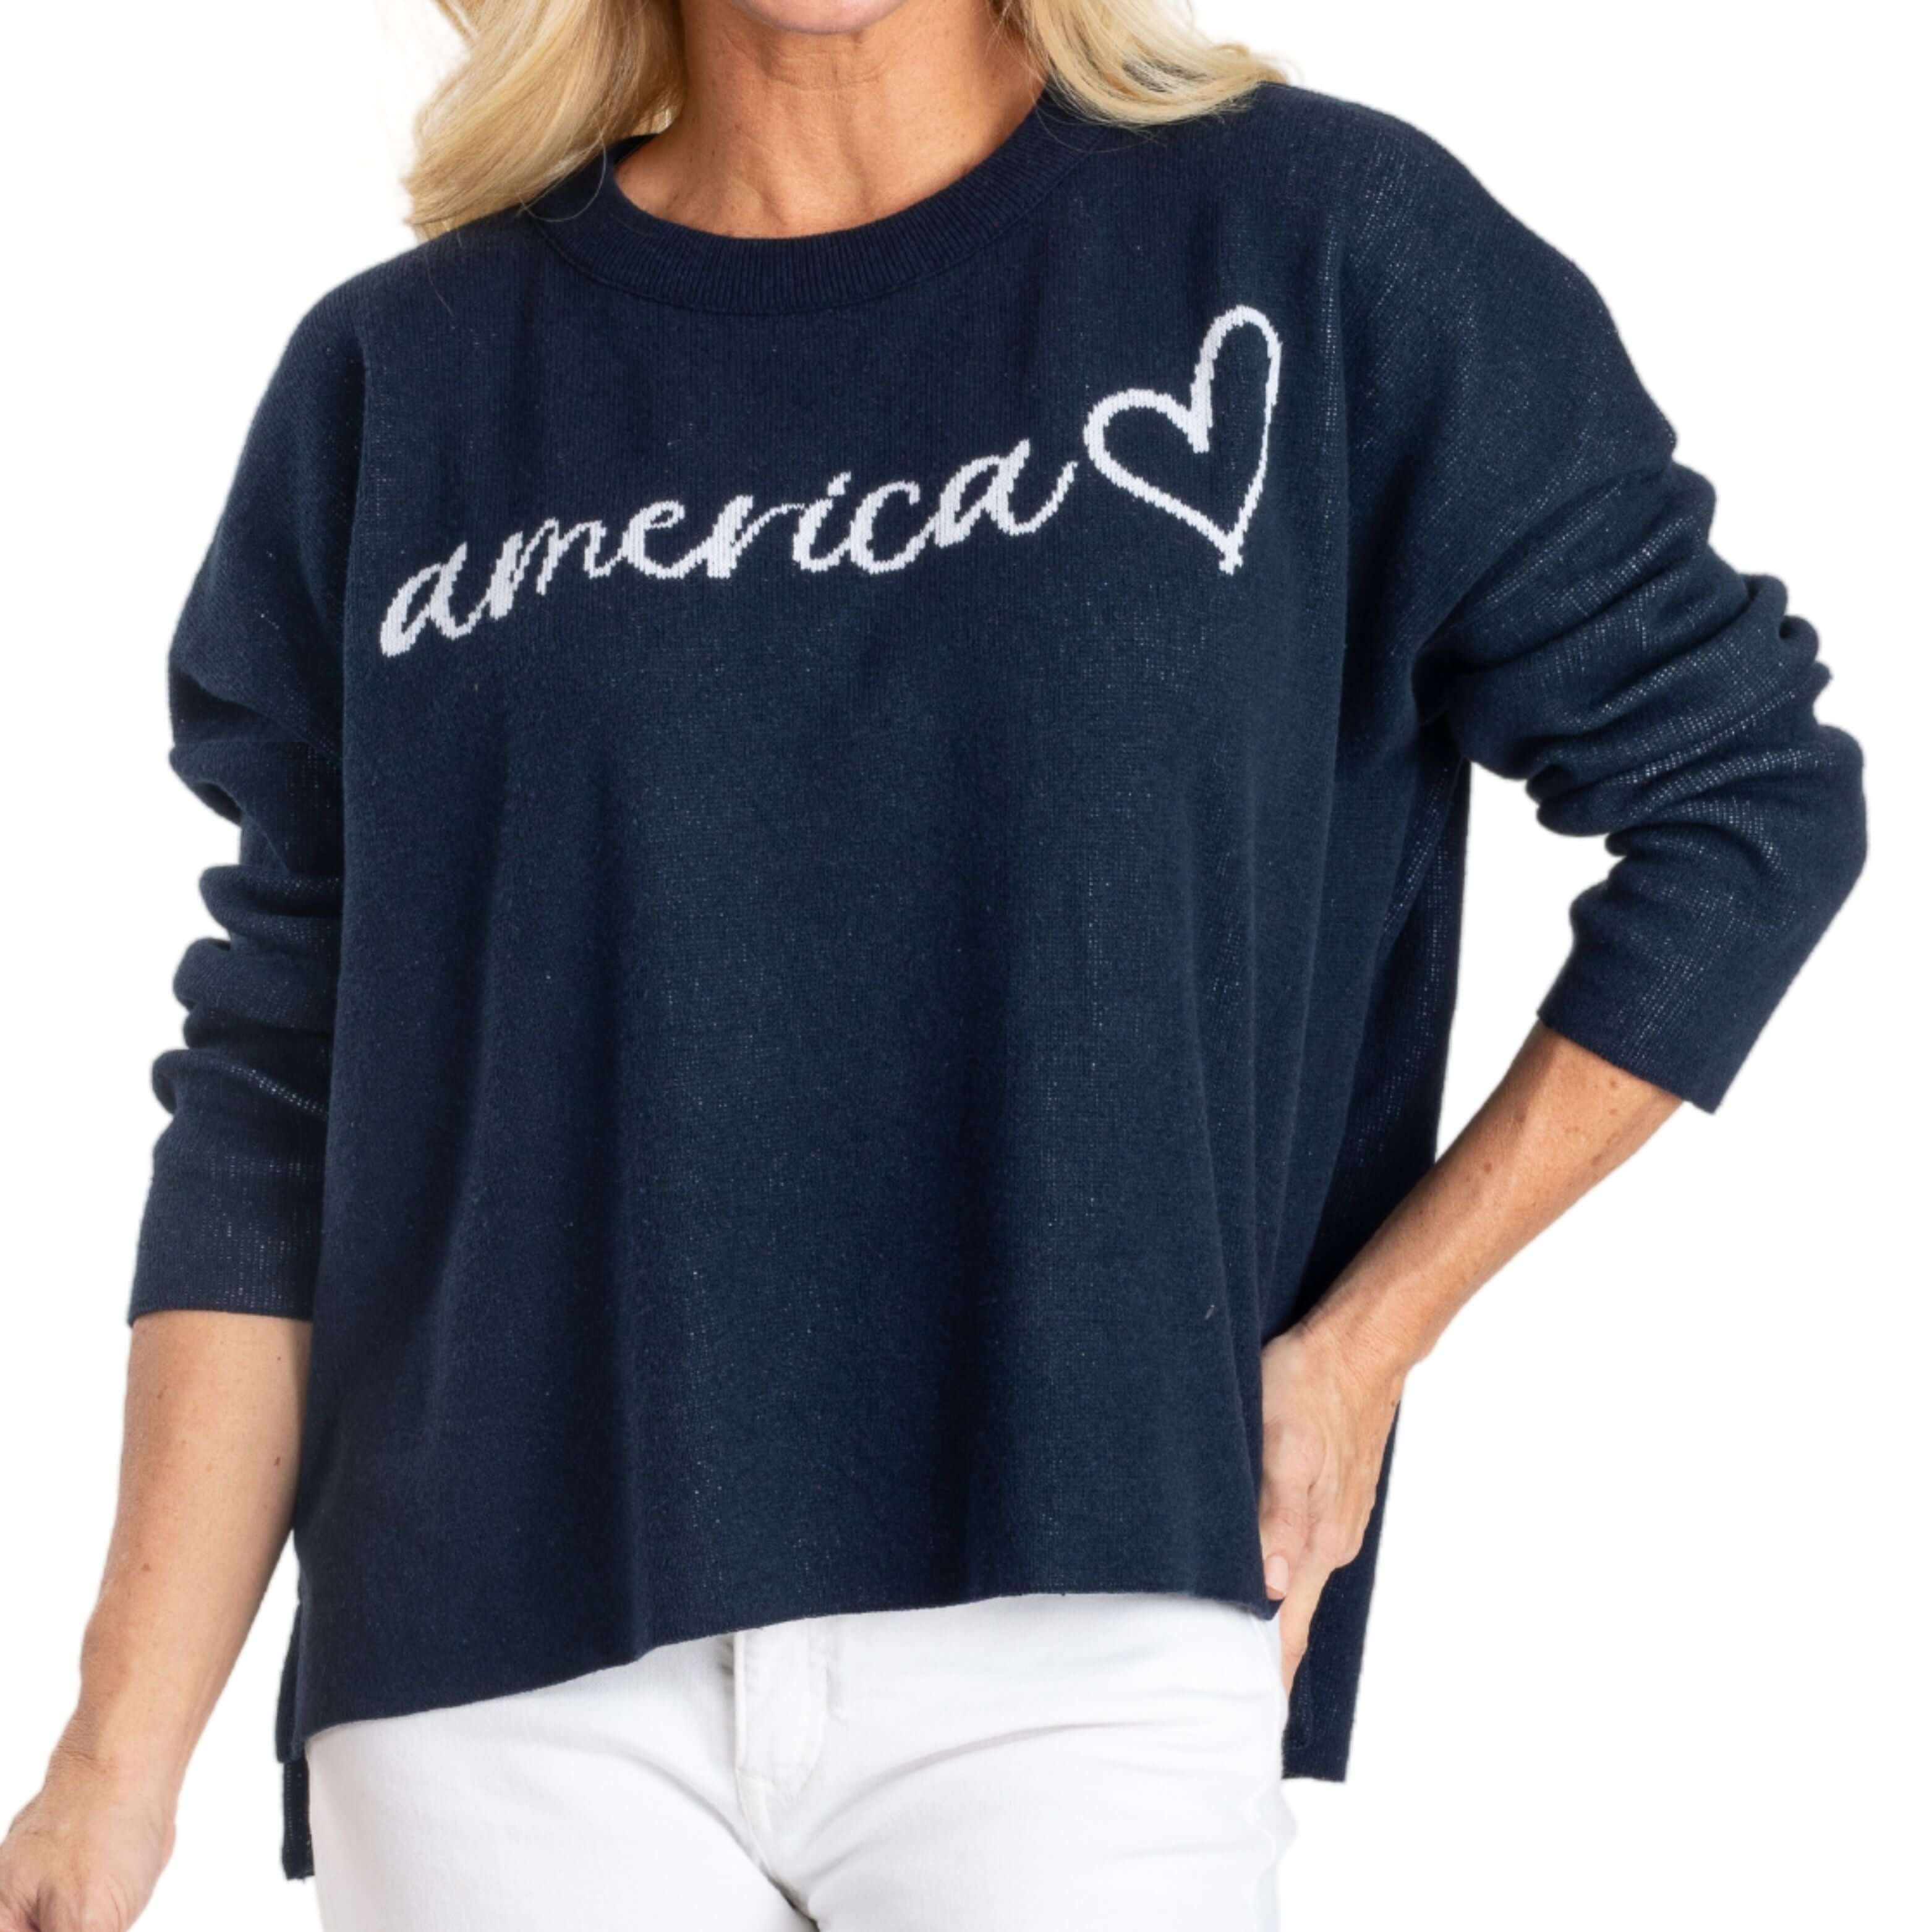 Women's Town Pride Made in USA Everyday America Sweater